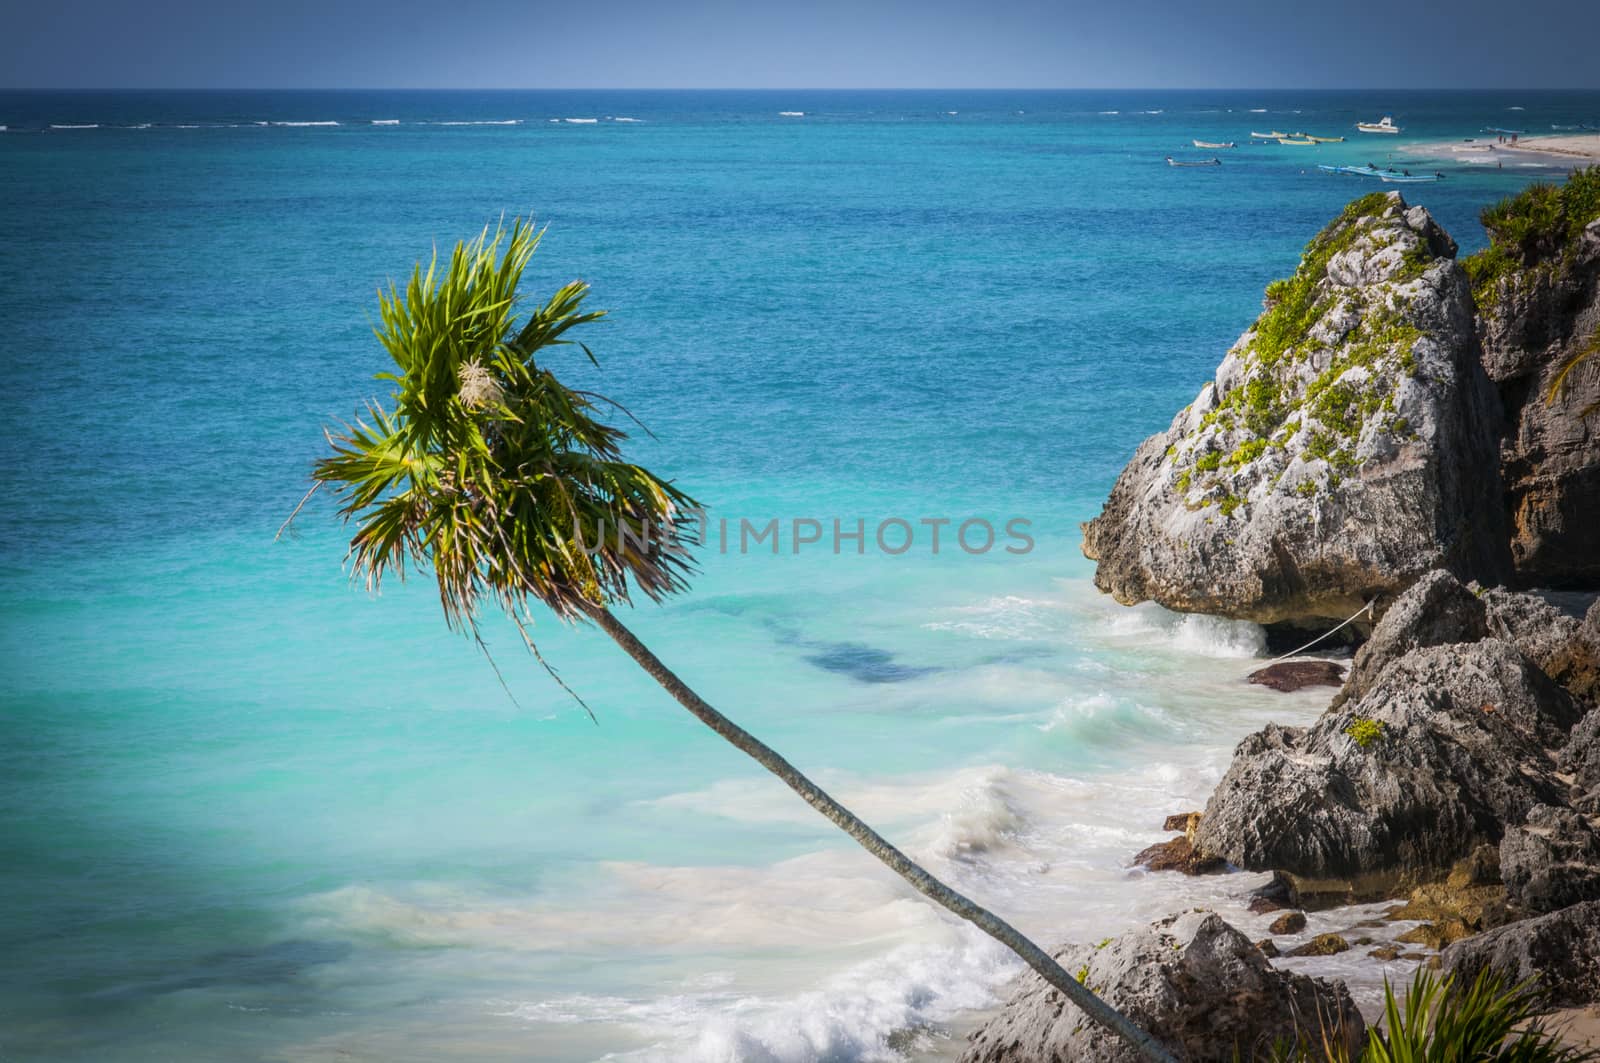 A palm tree and rocks in the Caribbean